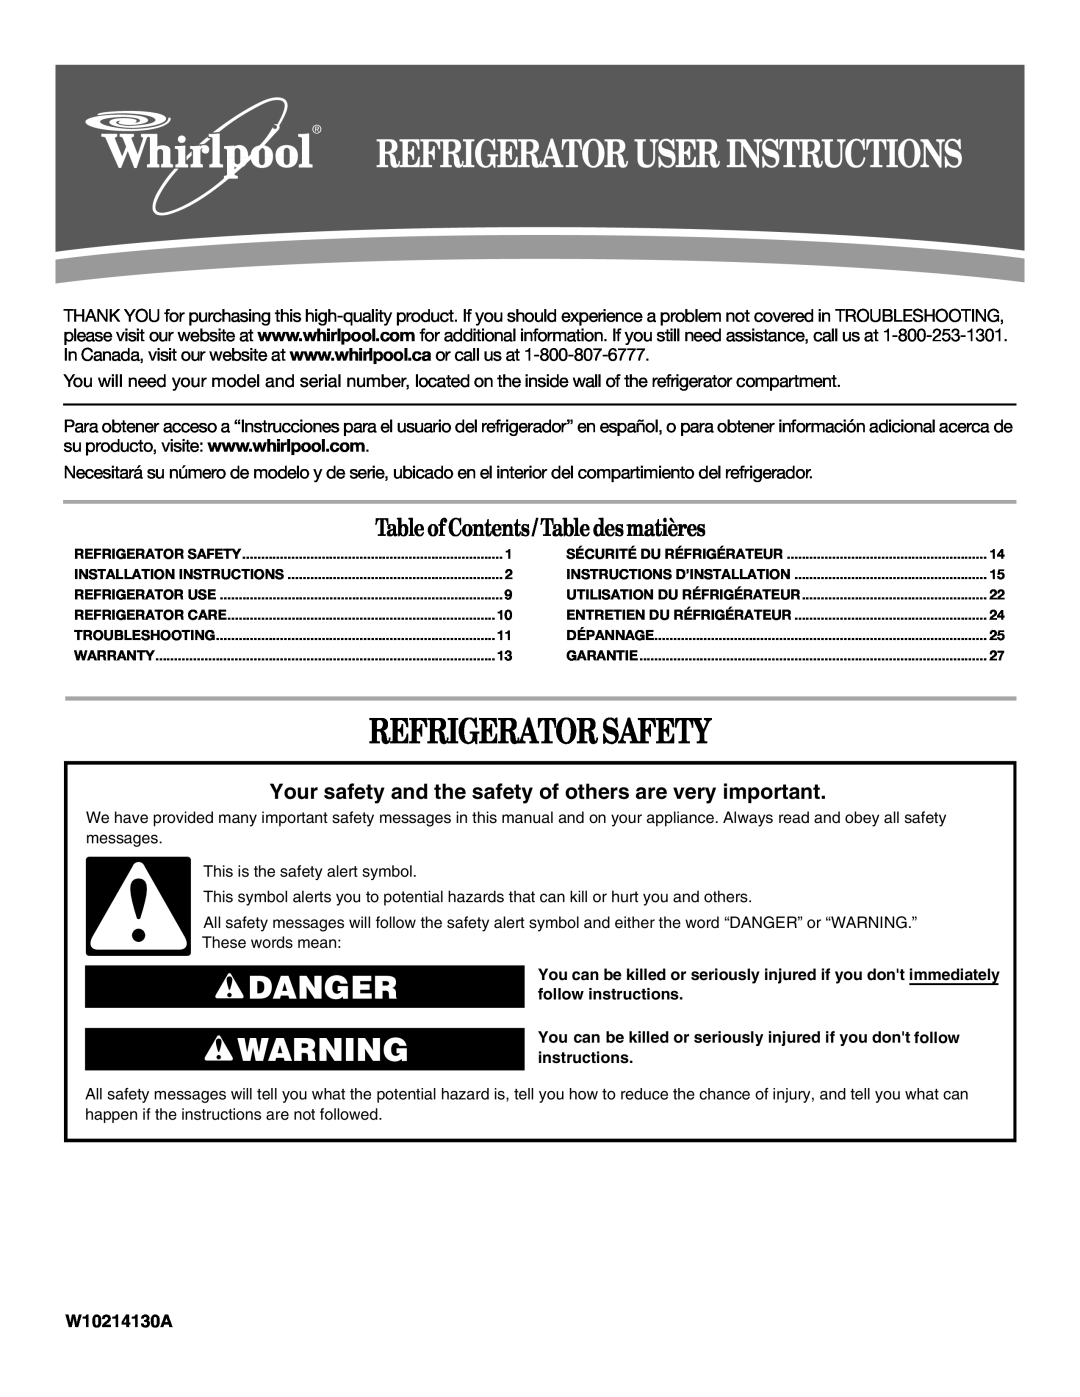 Whirlpool W10214130A installation instructions Refrigerator Safety, Danger, Table of Contents / Table desmatières 